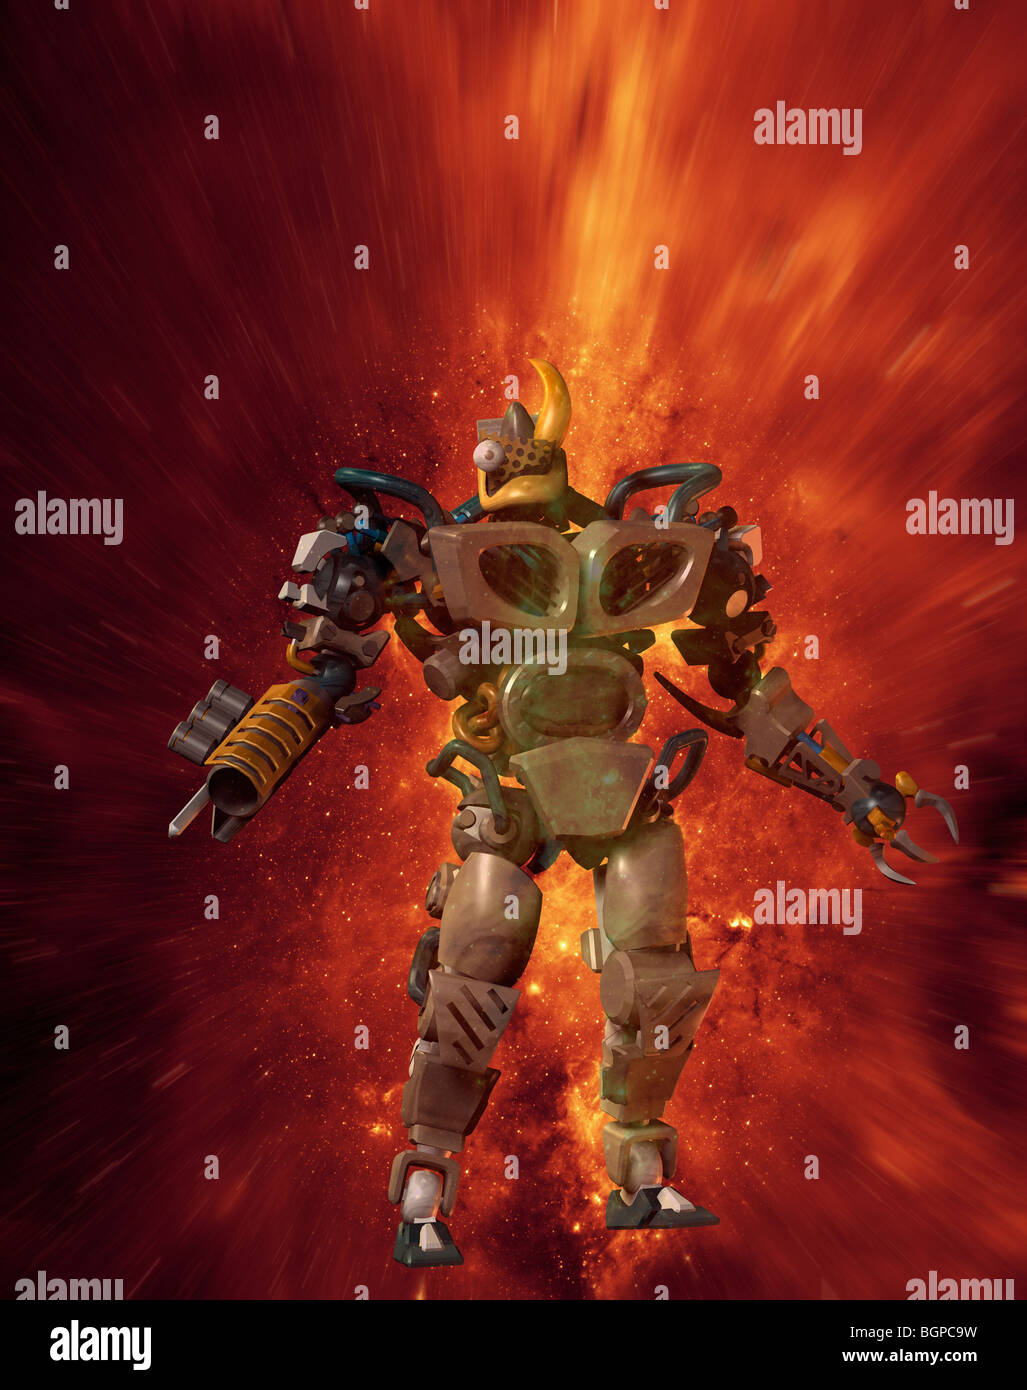 computer generated concept of a futuristic armor clad male robot emerging from a galactic explosion Stock Photo